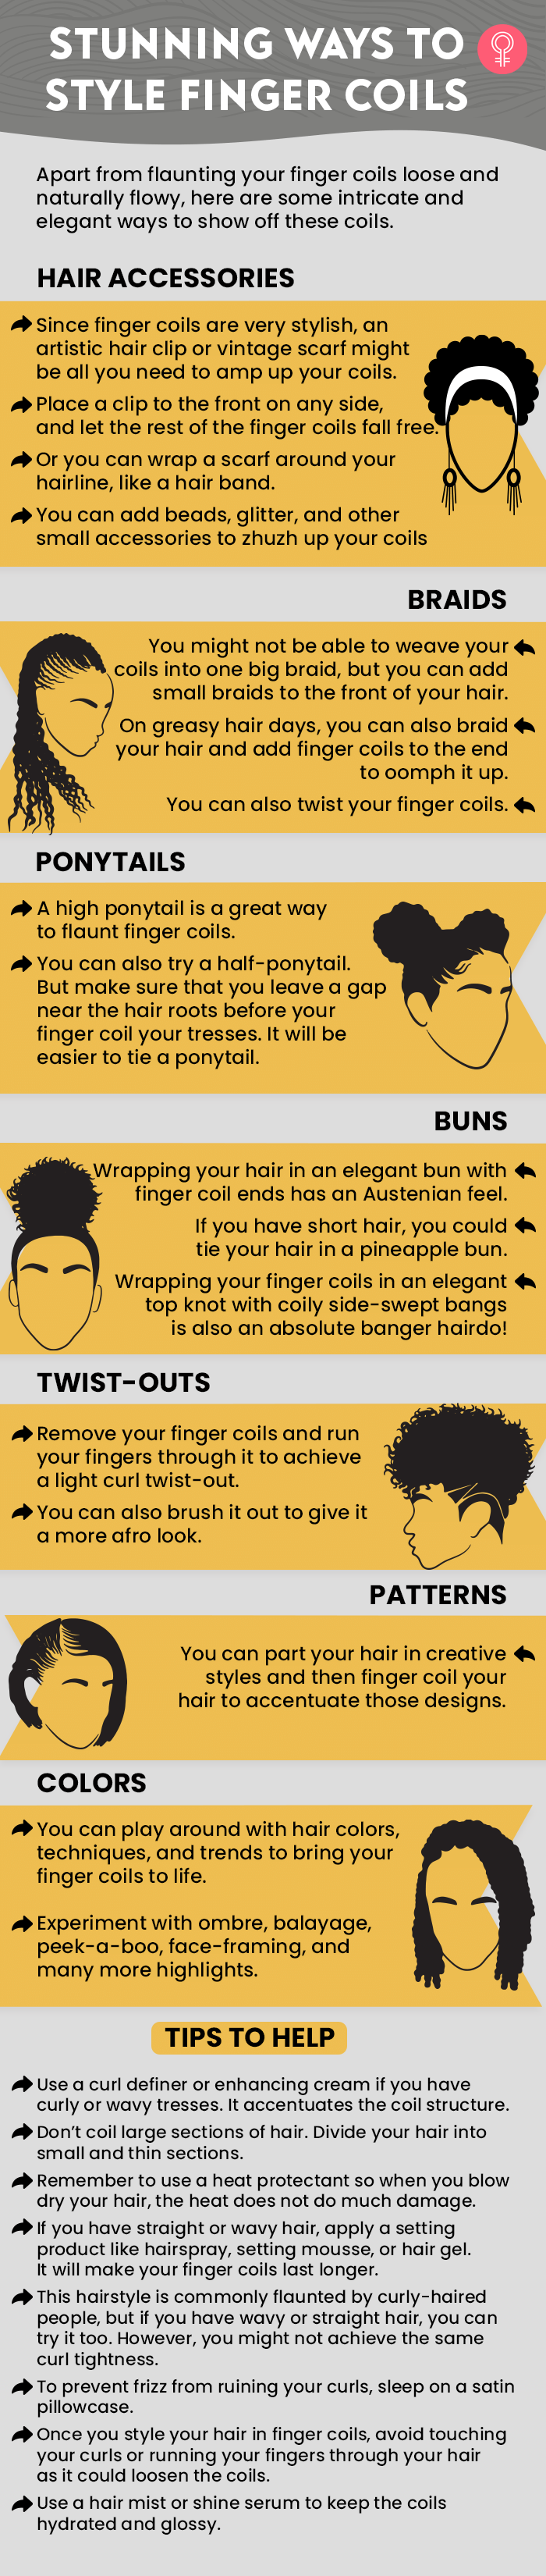 7 stunning ways to style finger coils (infographic)